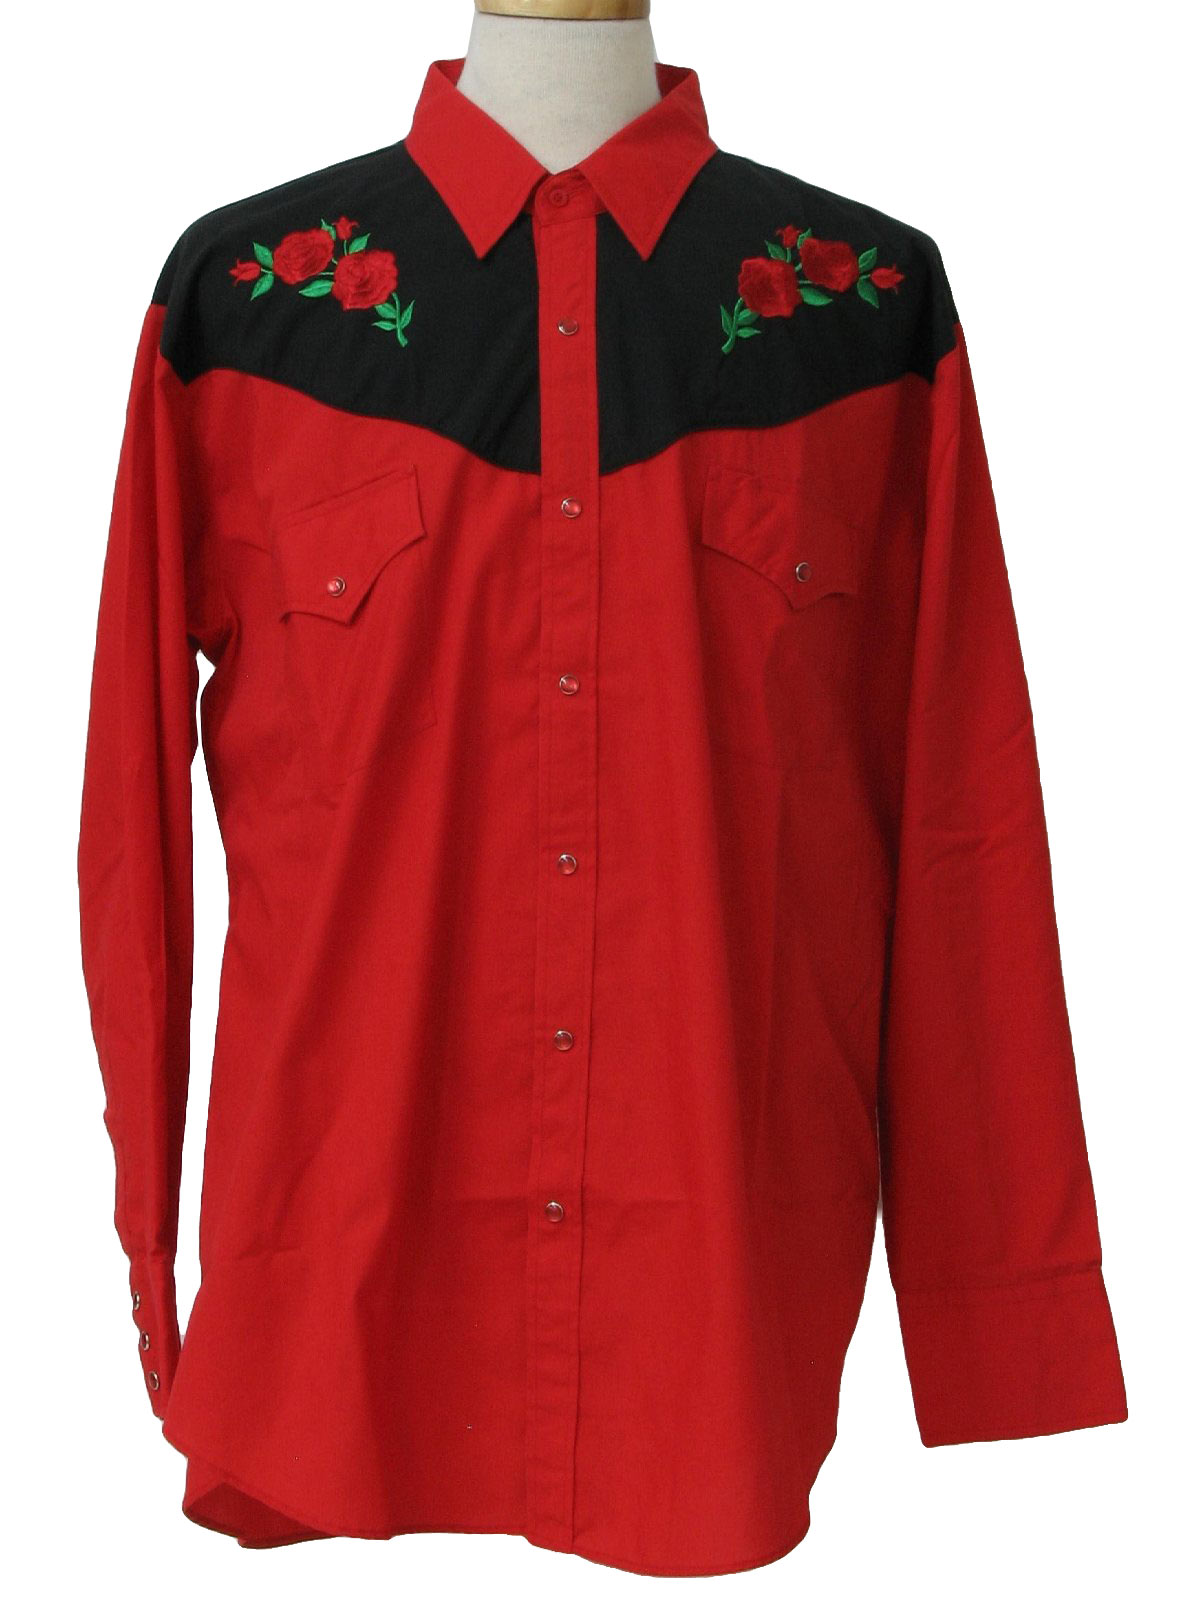 90s Western Shirt (Ely Diamond): 90s -Ely Diamond- Mens black and red ...